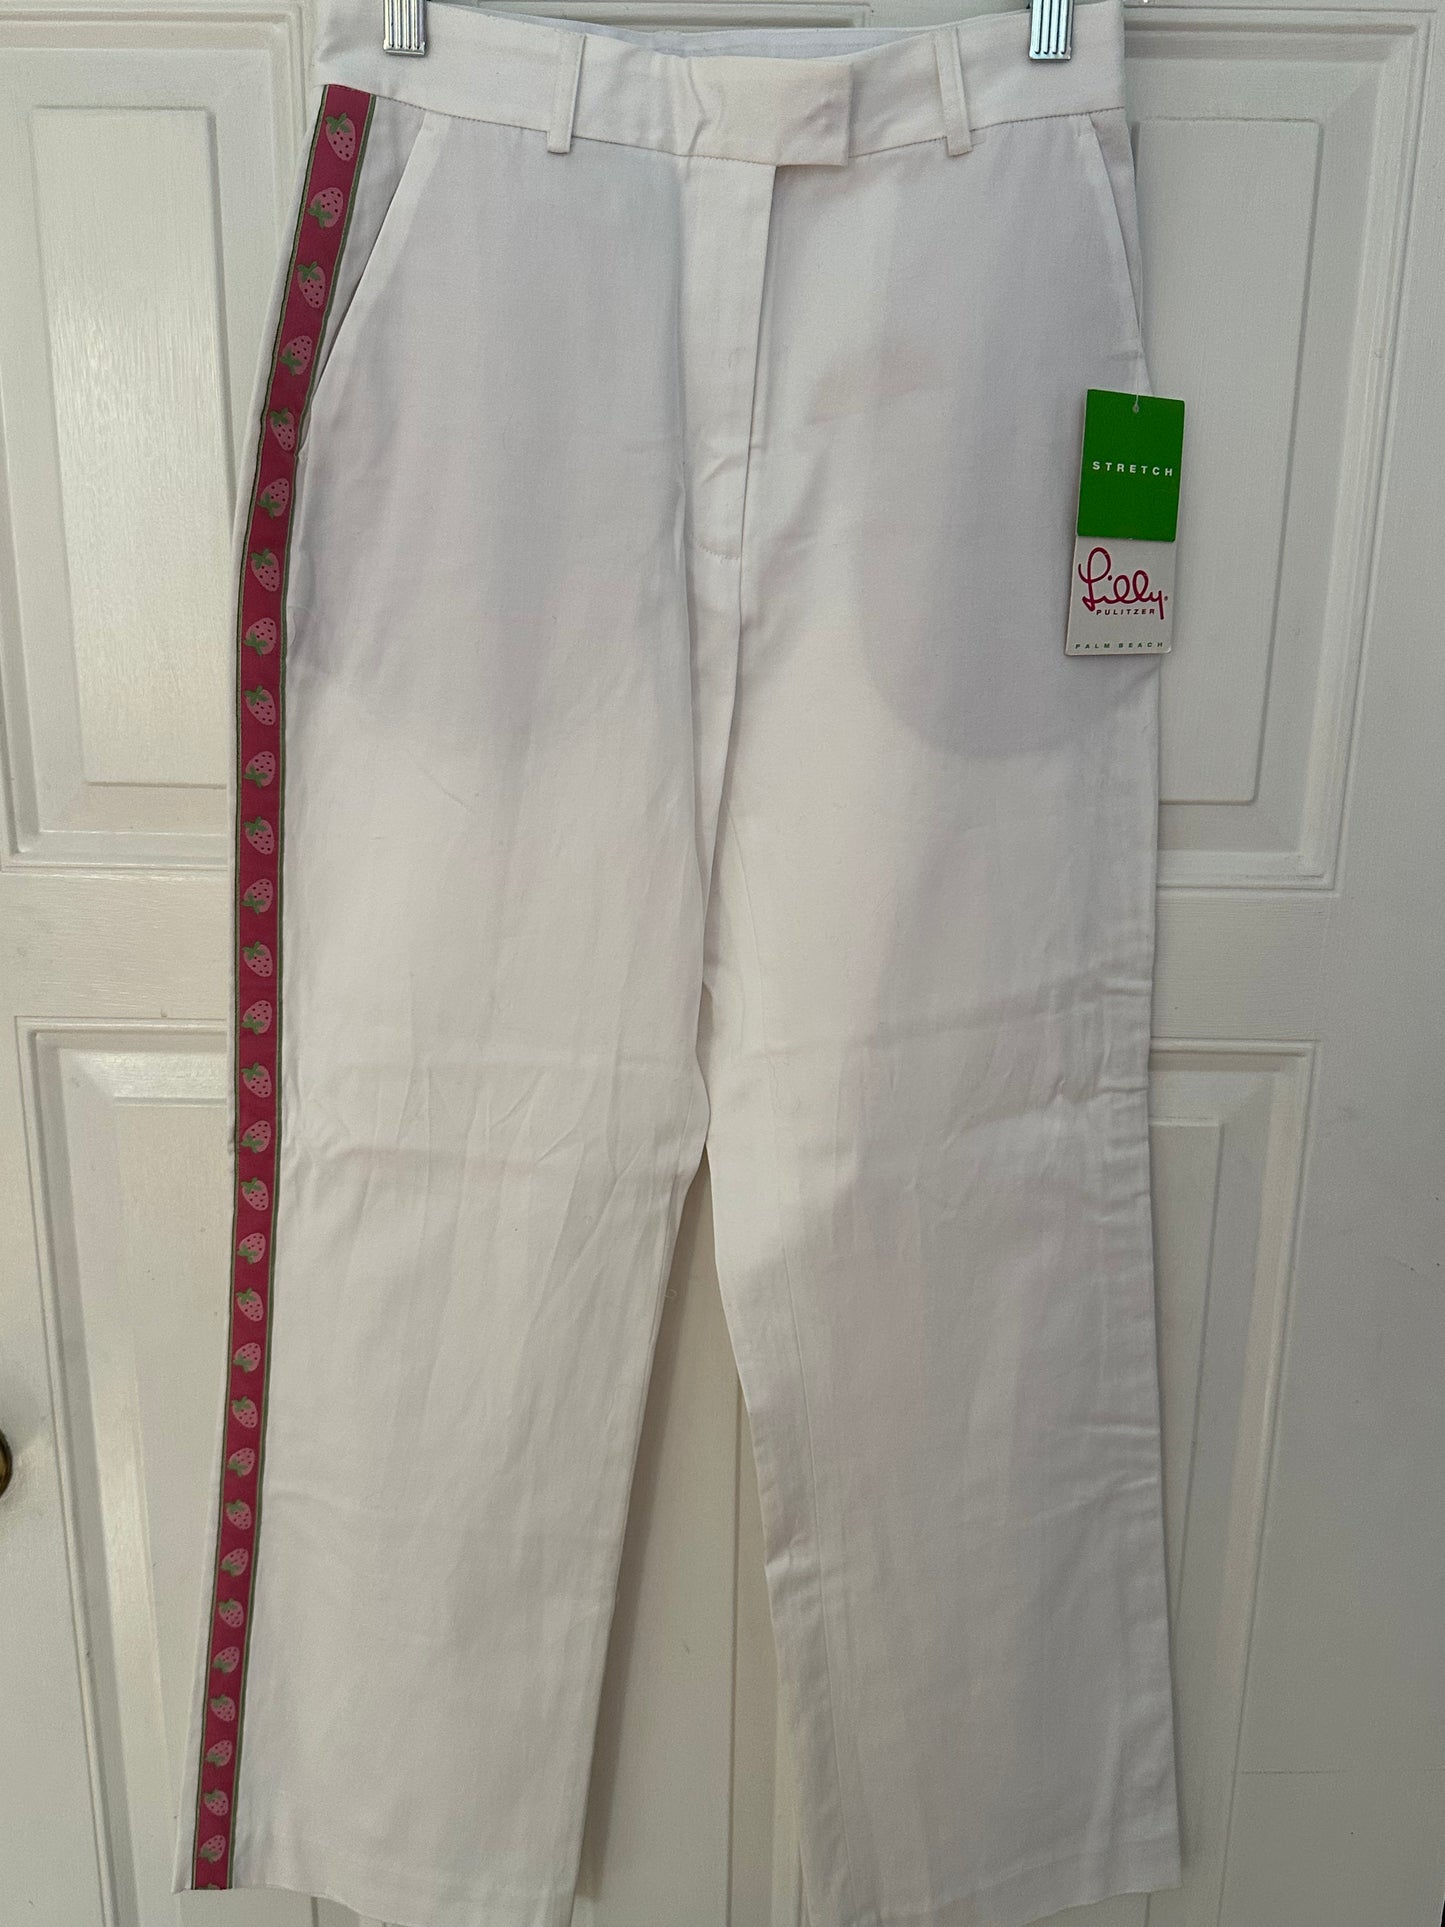 NEW NWT Lilly Pulitzer Sz 2 White Pants Cropped